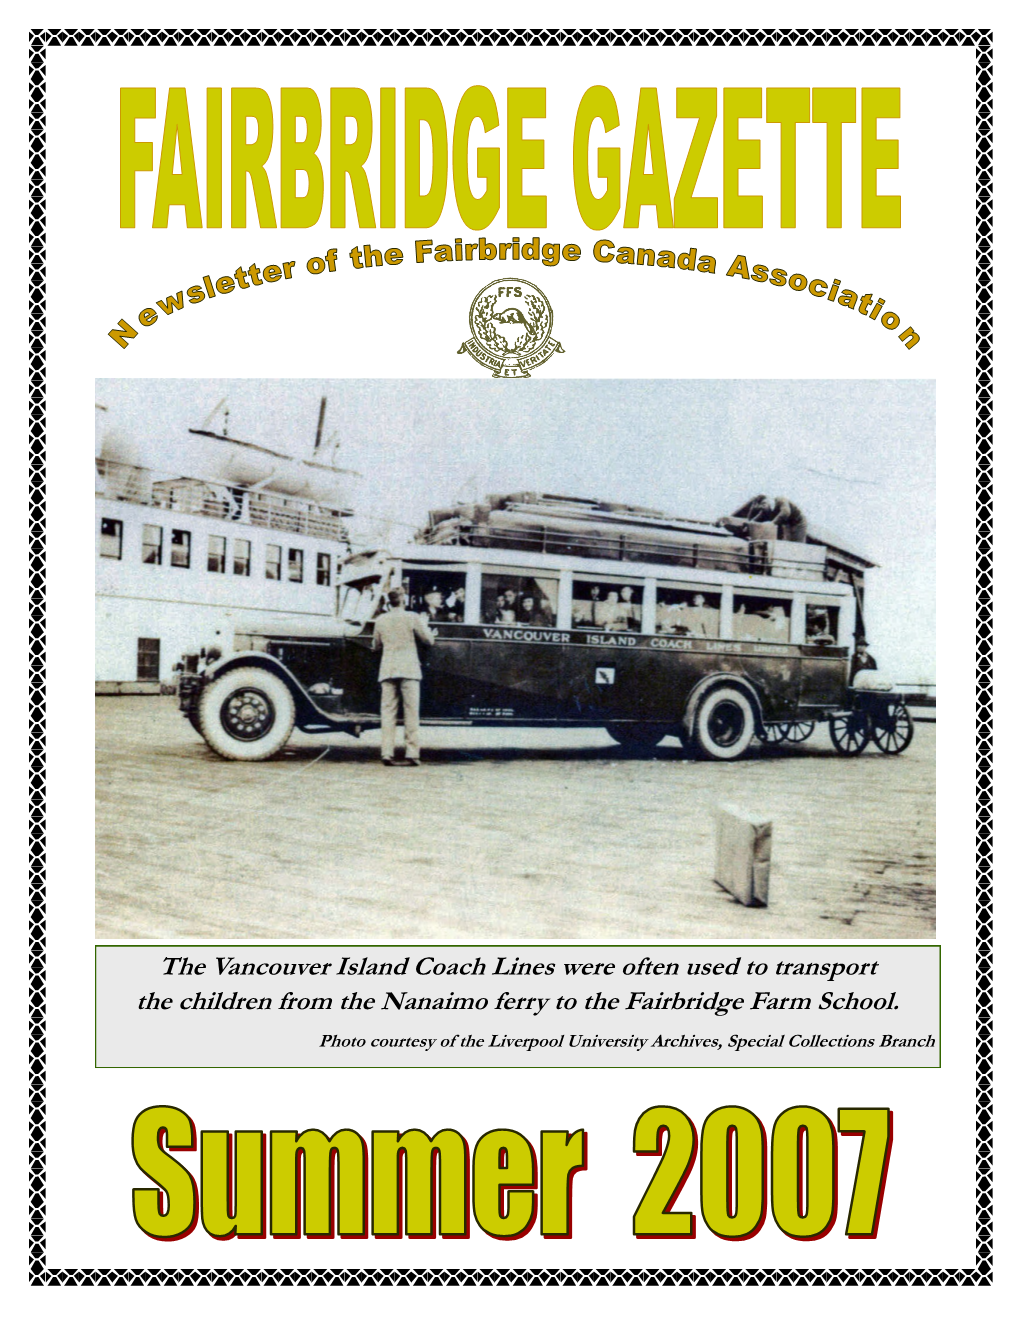 The Vancouver Island Coach Lines Were Often Used to Transport the Children from the Nanaimo Ferry to the Fairbridge Farm School